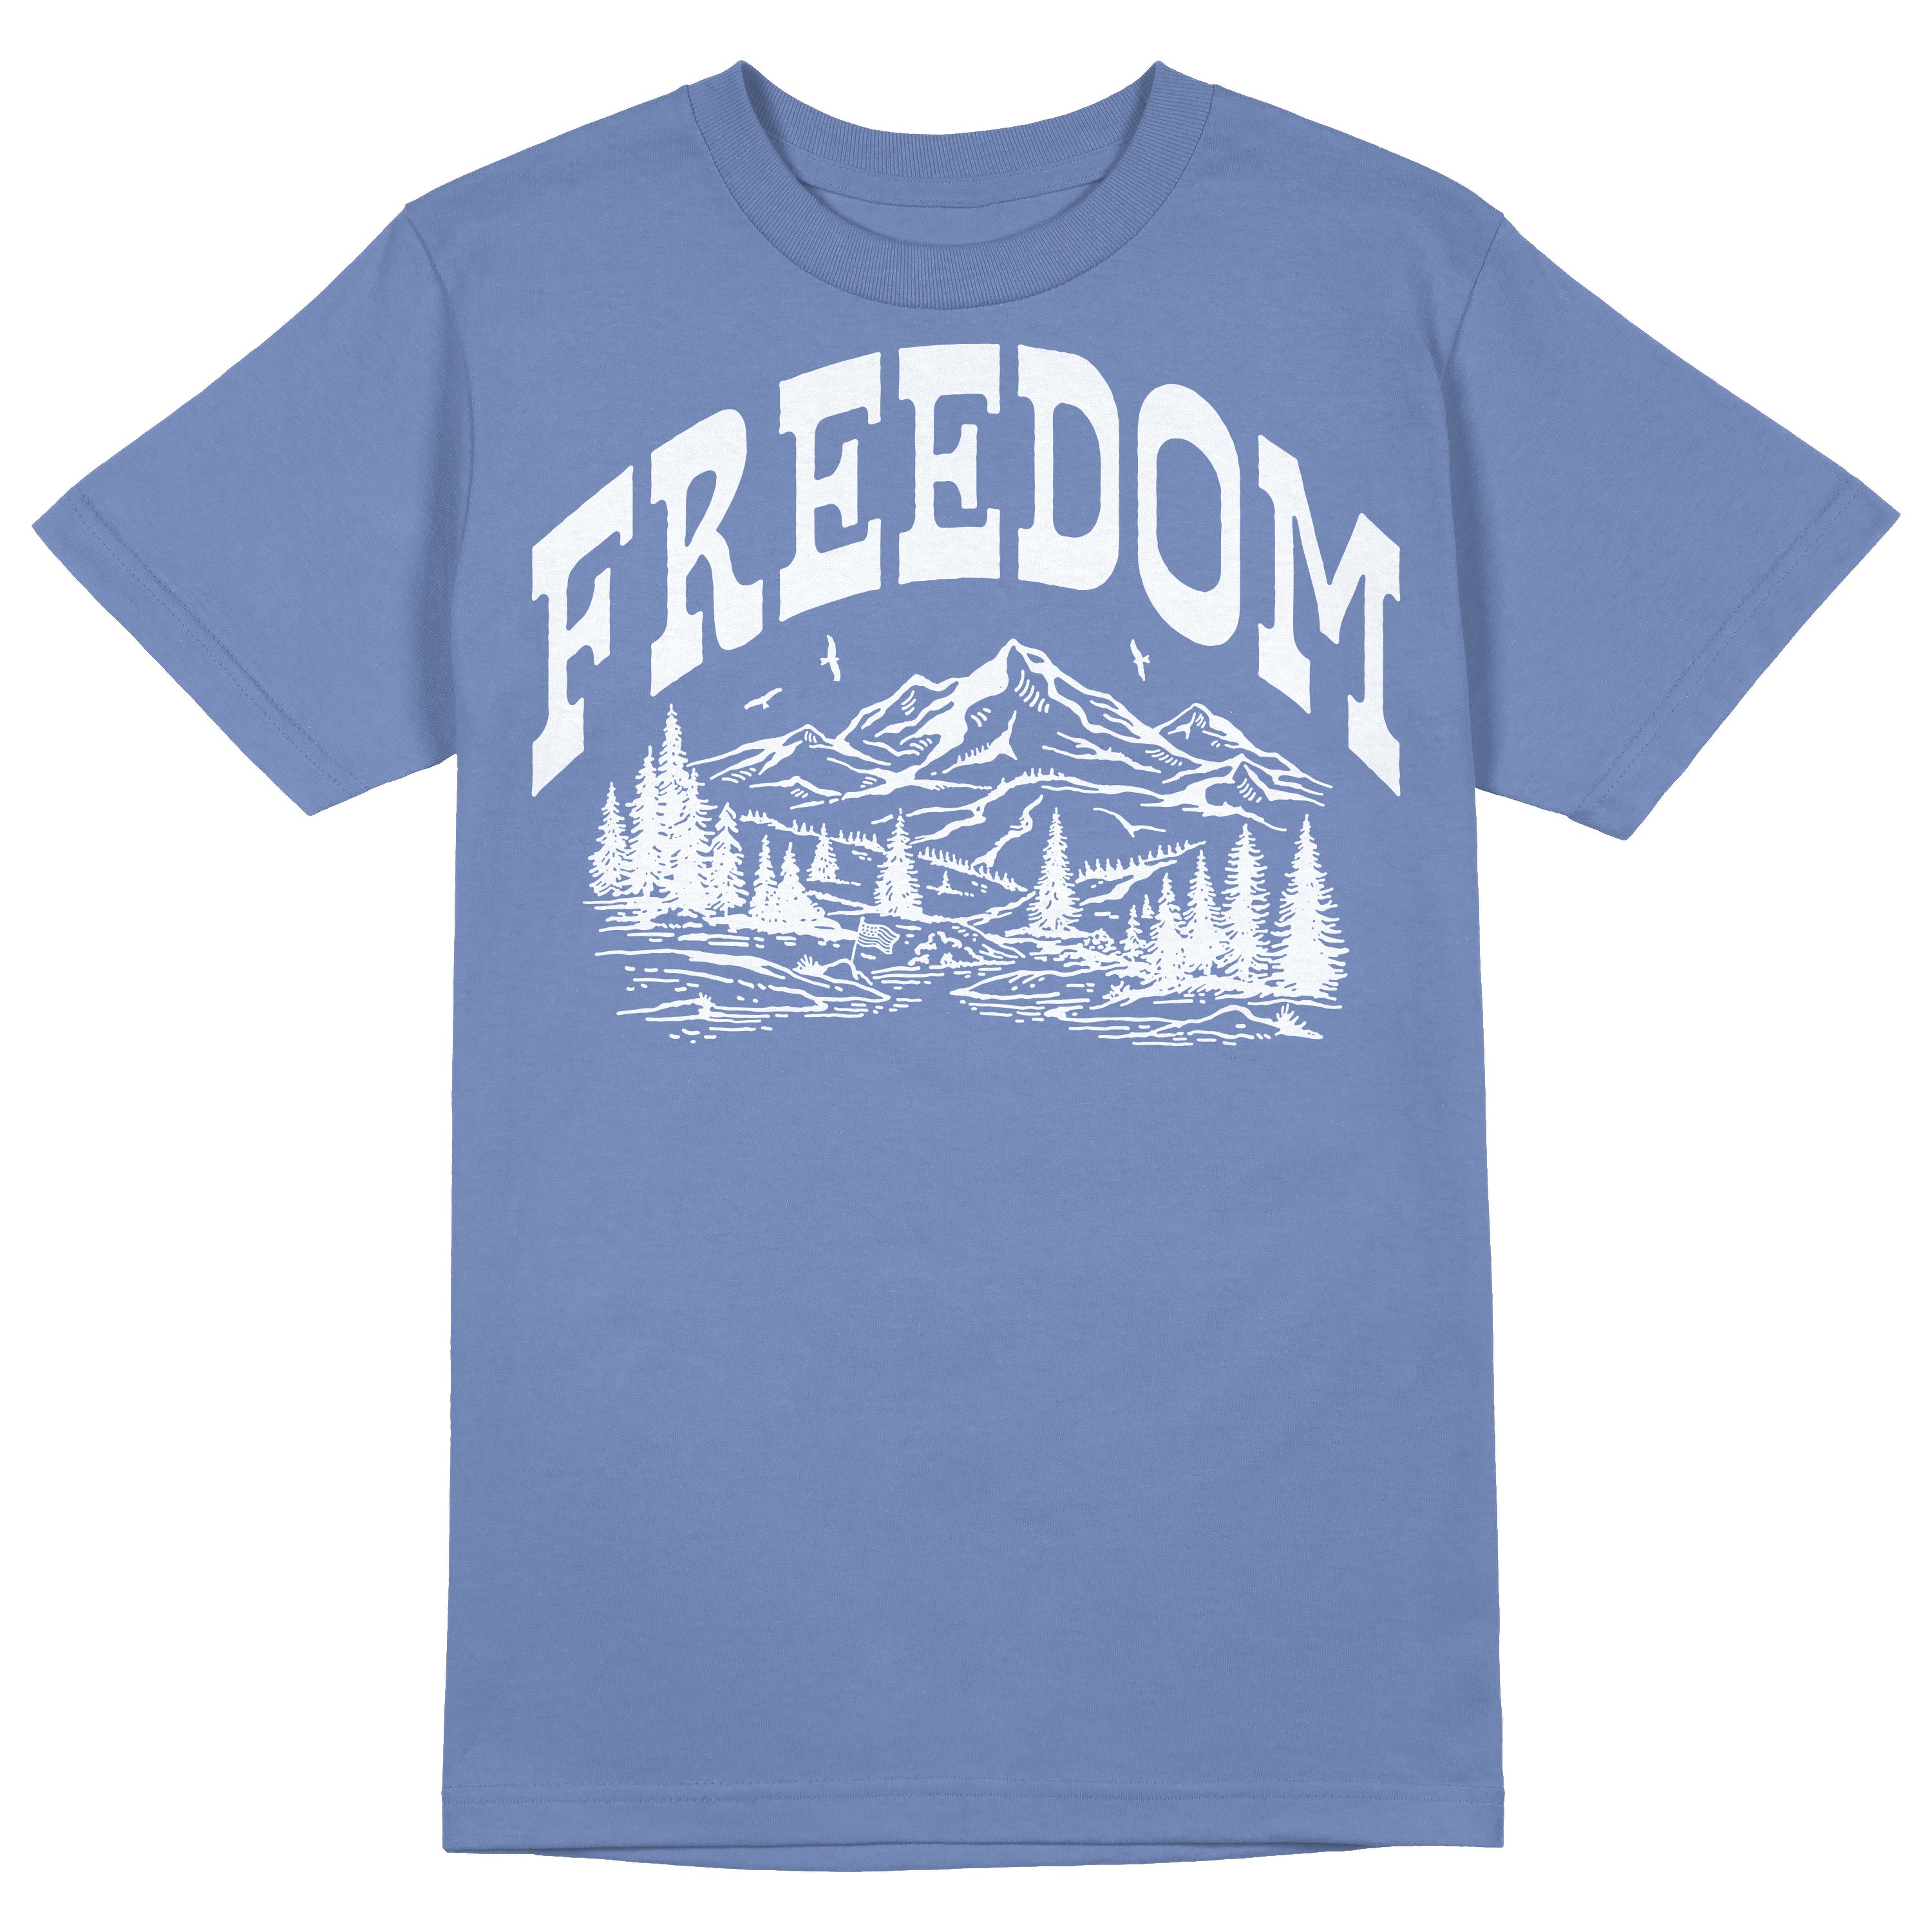 Freedom In the Mountain Wind